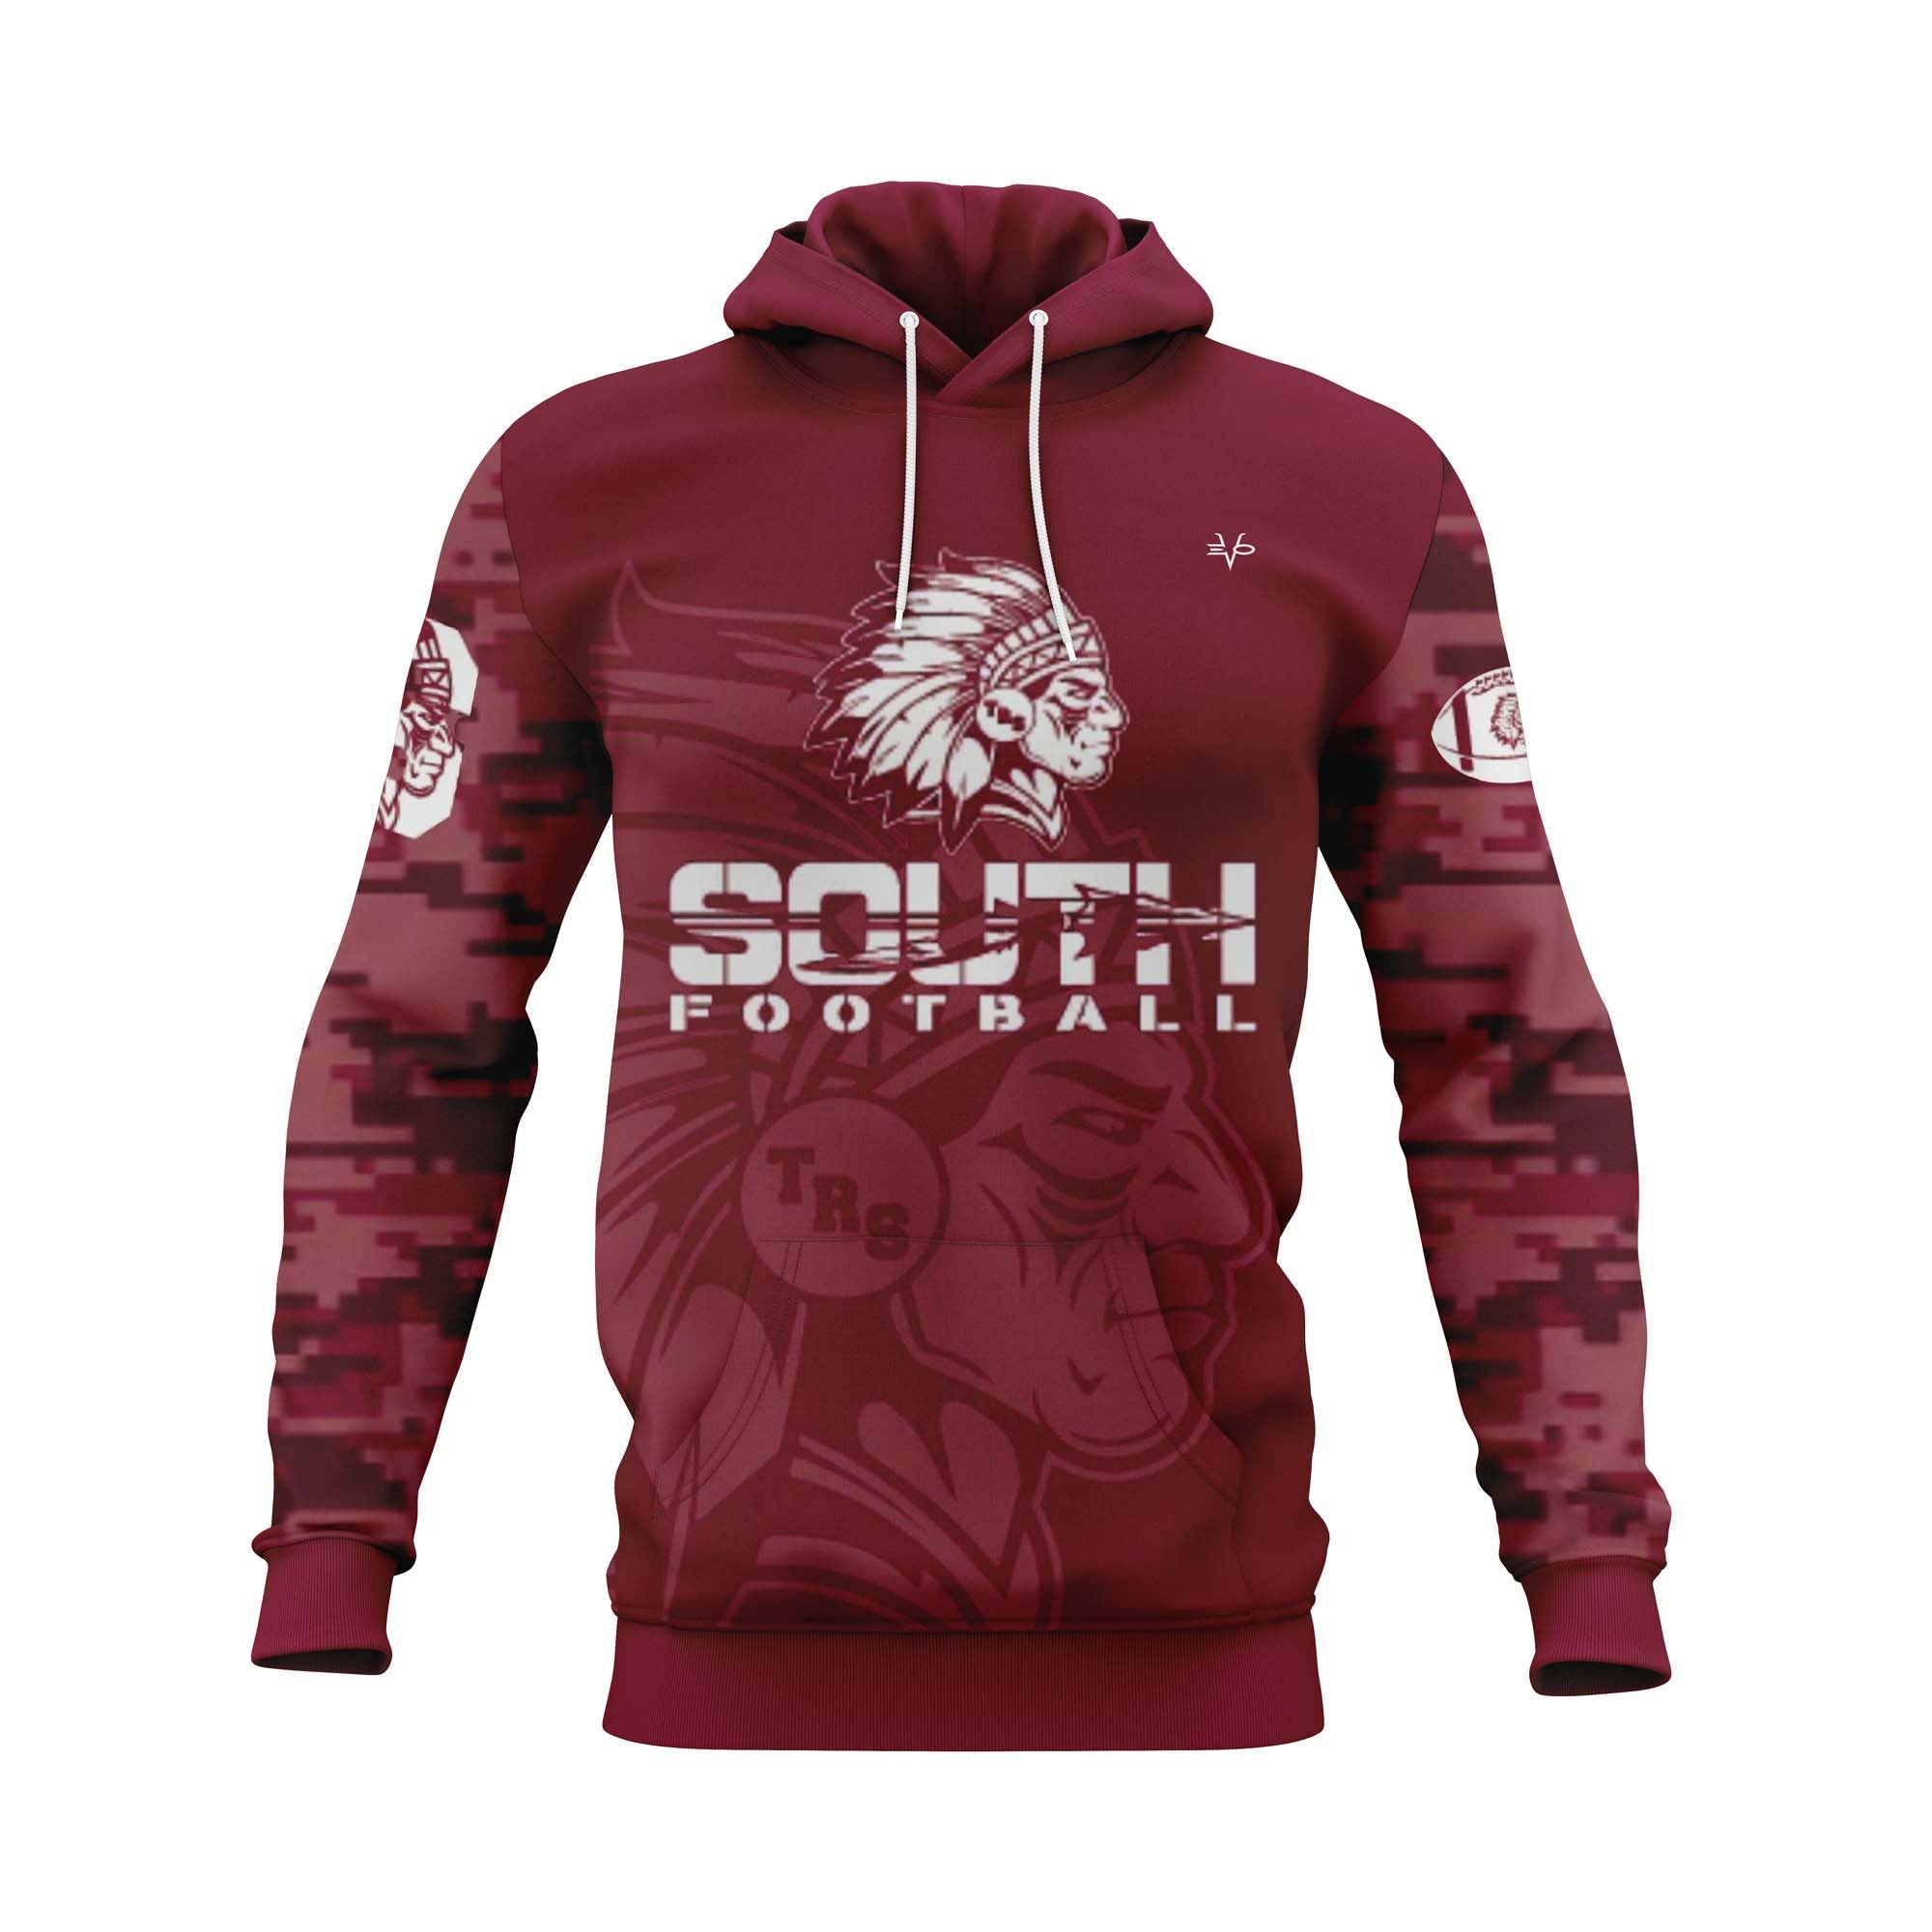 TOMS RIVER SOUTH FOOTBALL Sublimated Hoodie